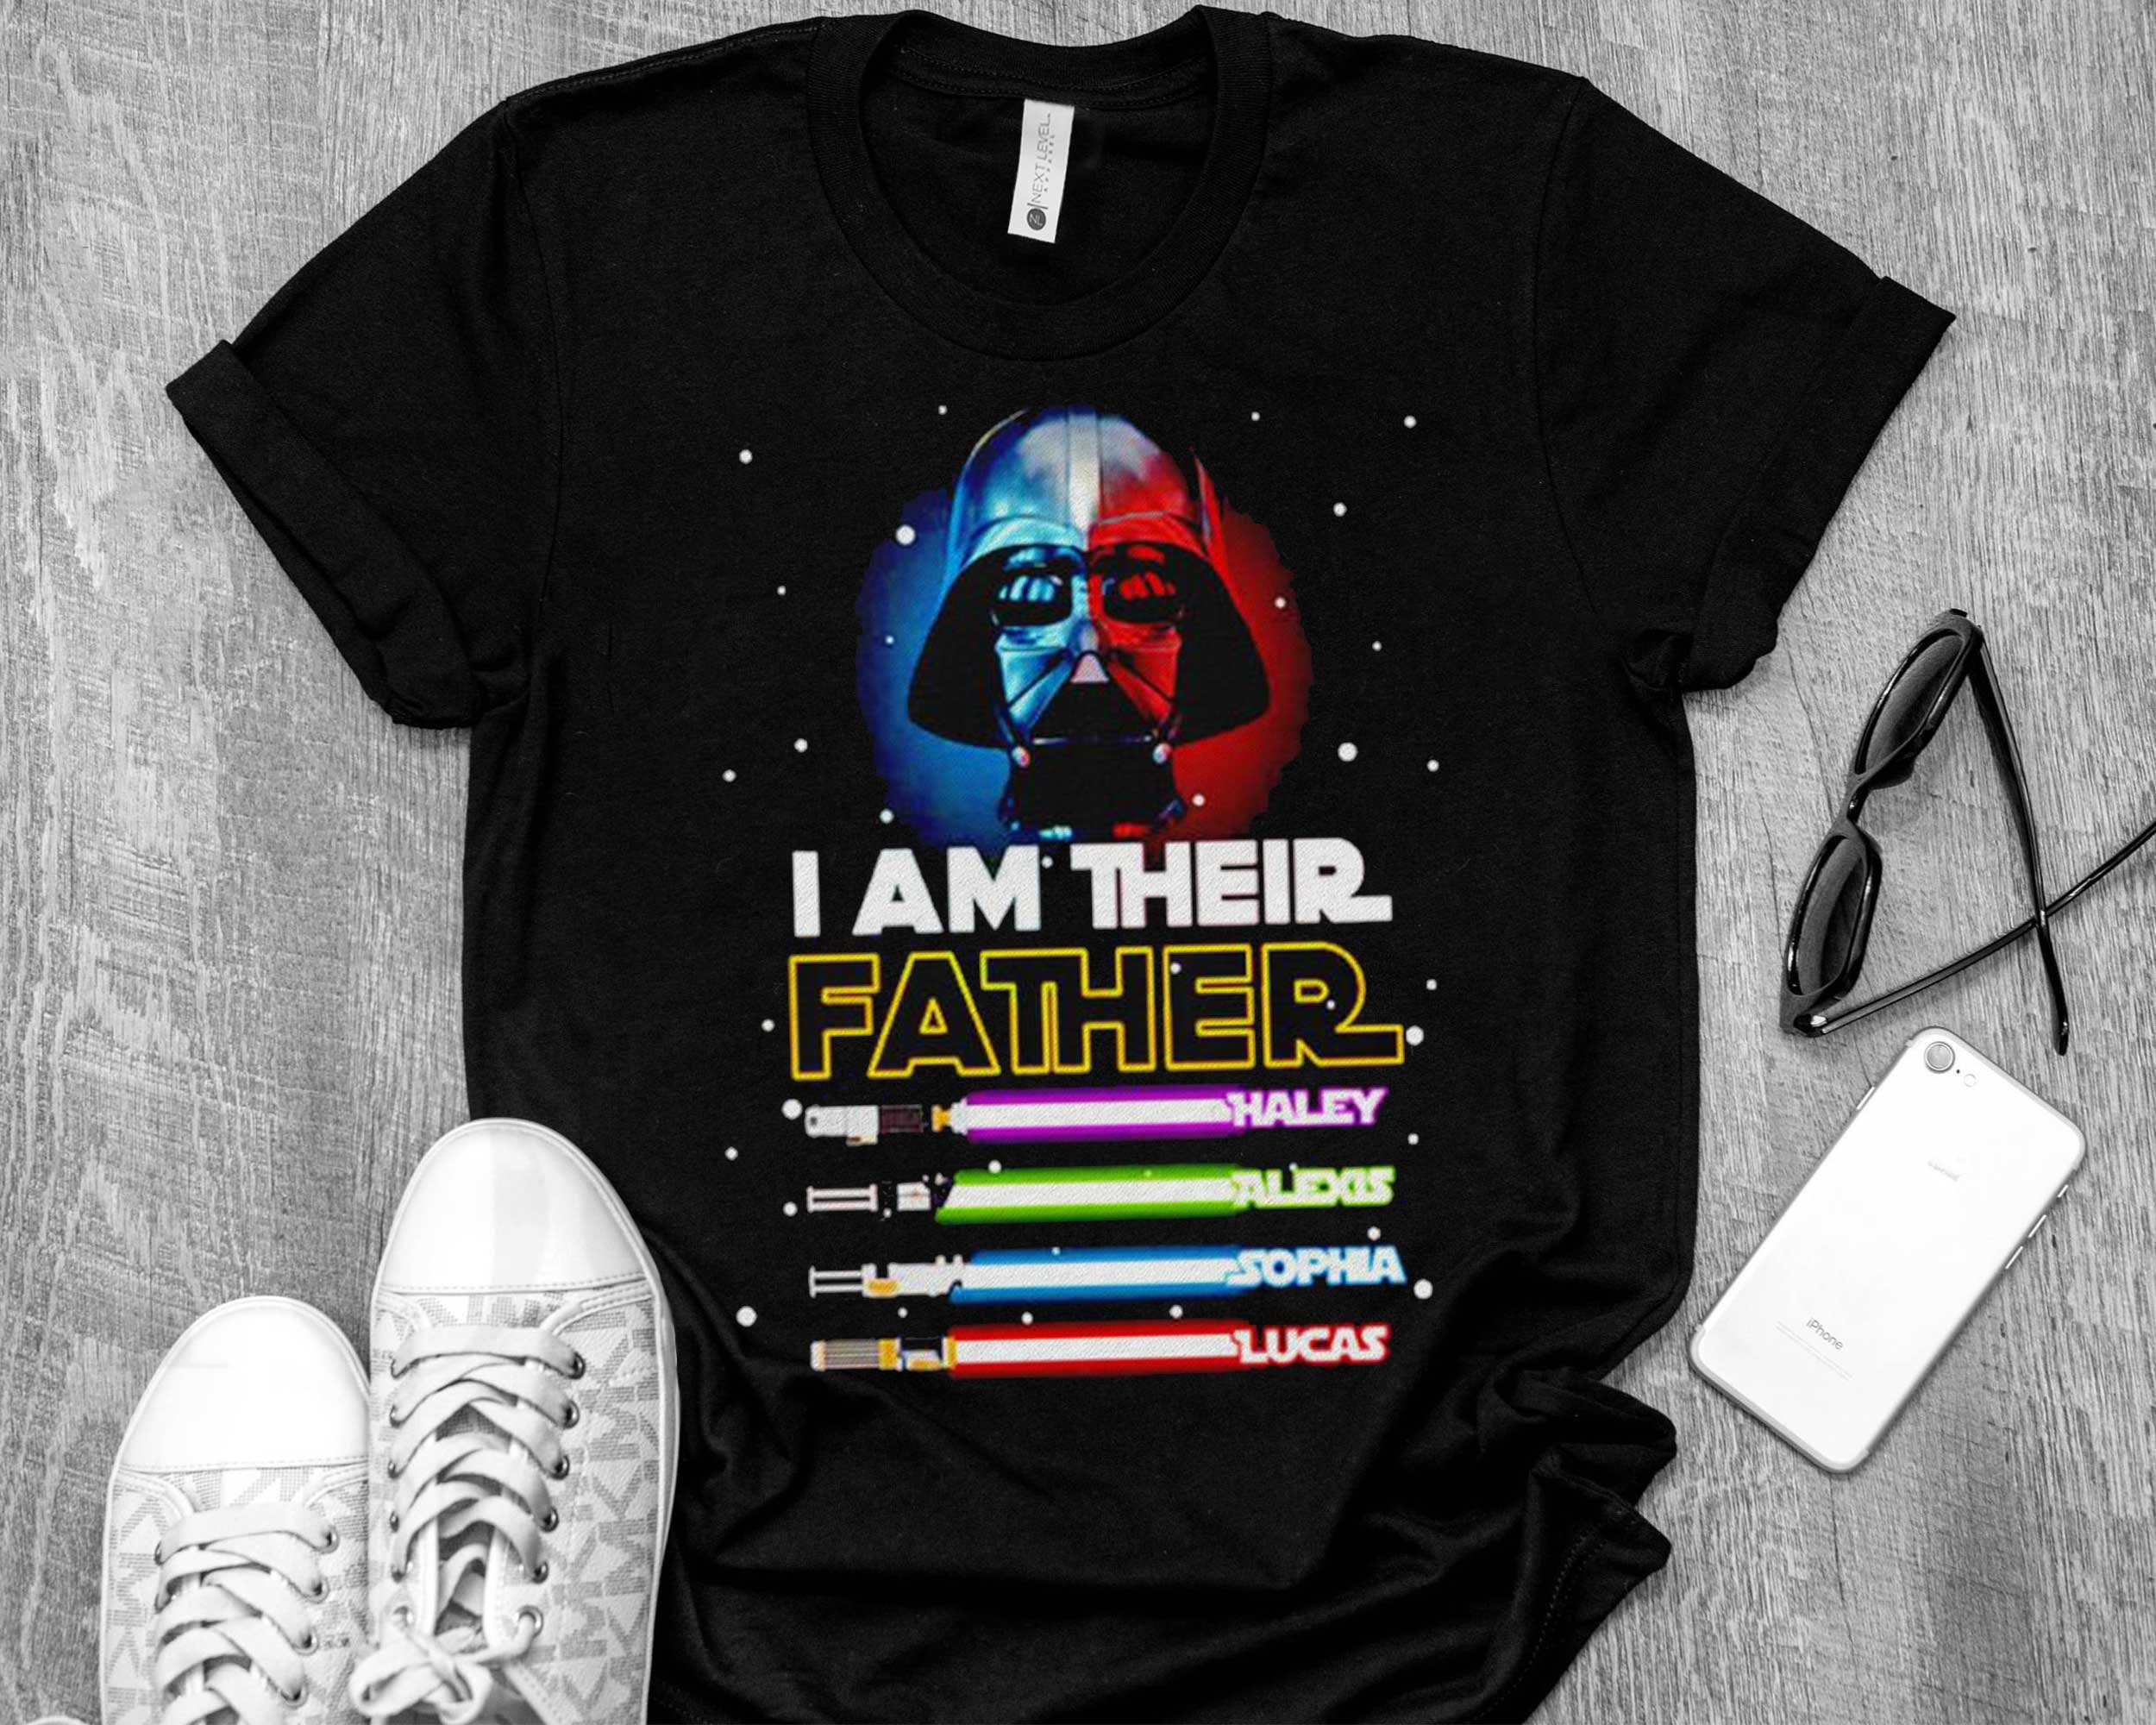 Personalized I Am Their Father T-Shirt, Custom Kids Name Shirt for Dad, Father’s Day Gift, Starwars Dad Shirt, Light Saber Gift